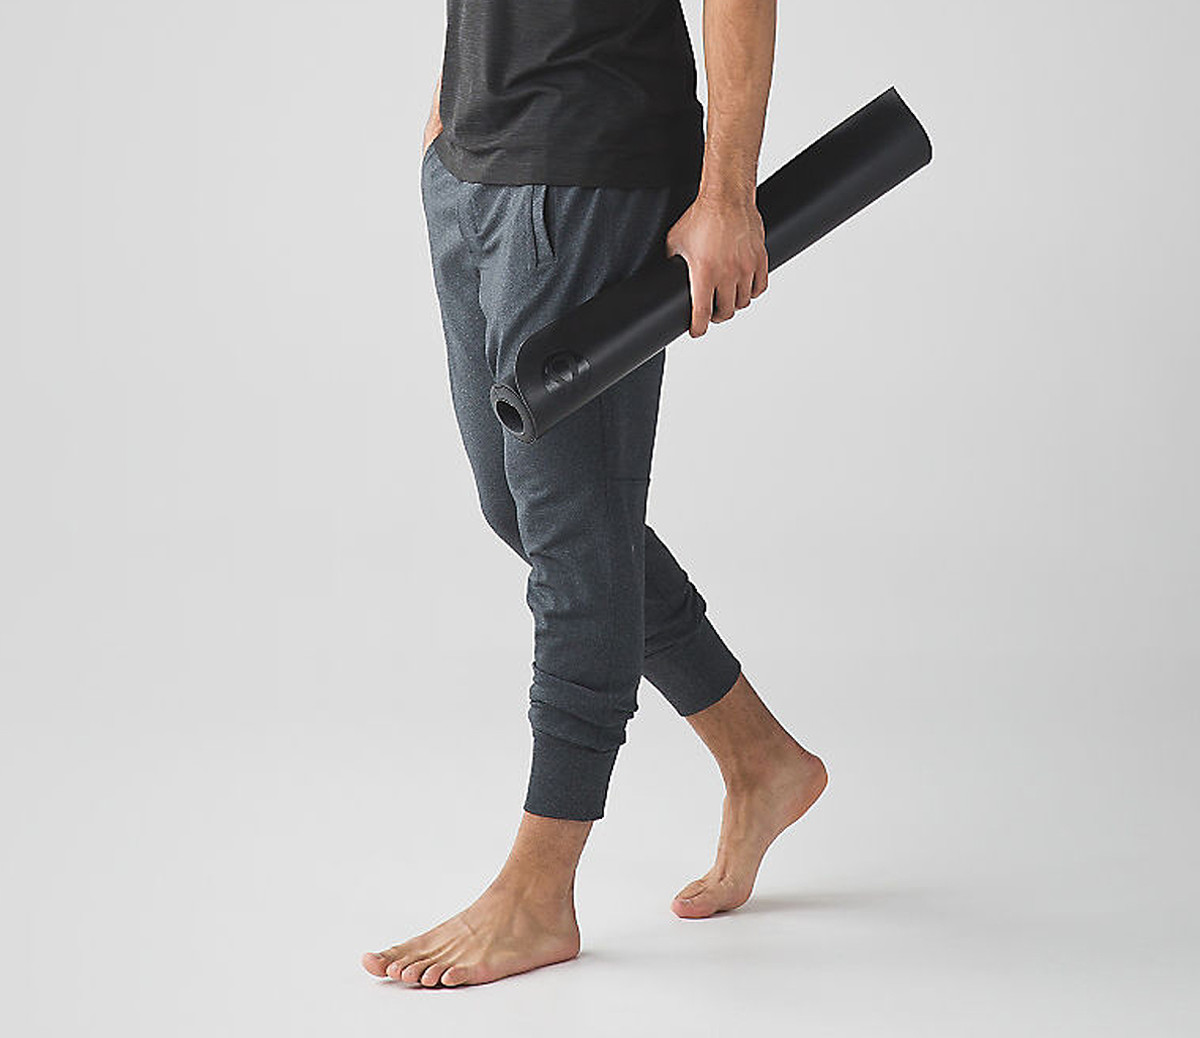 The Best Yoga Pants, Tops, and More for Men